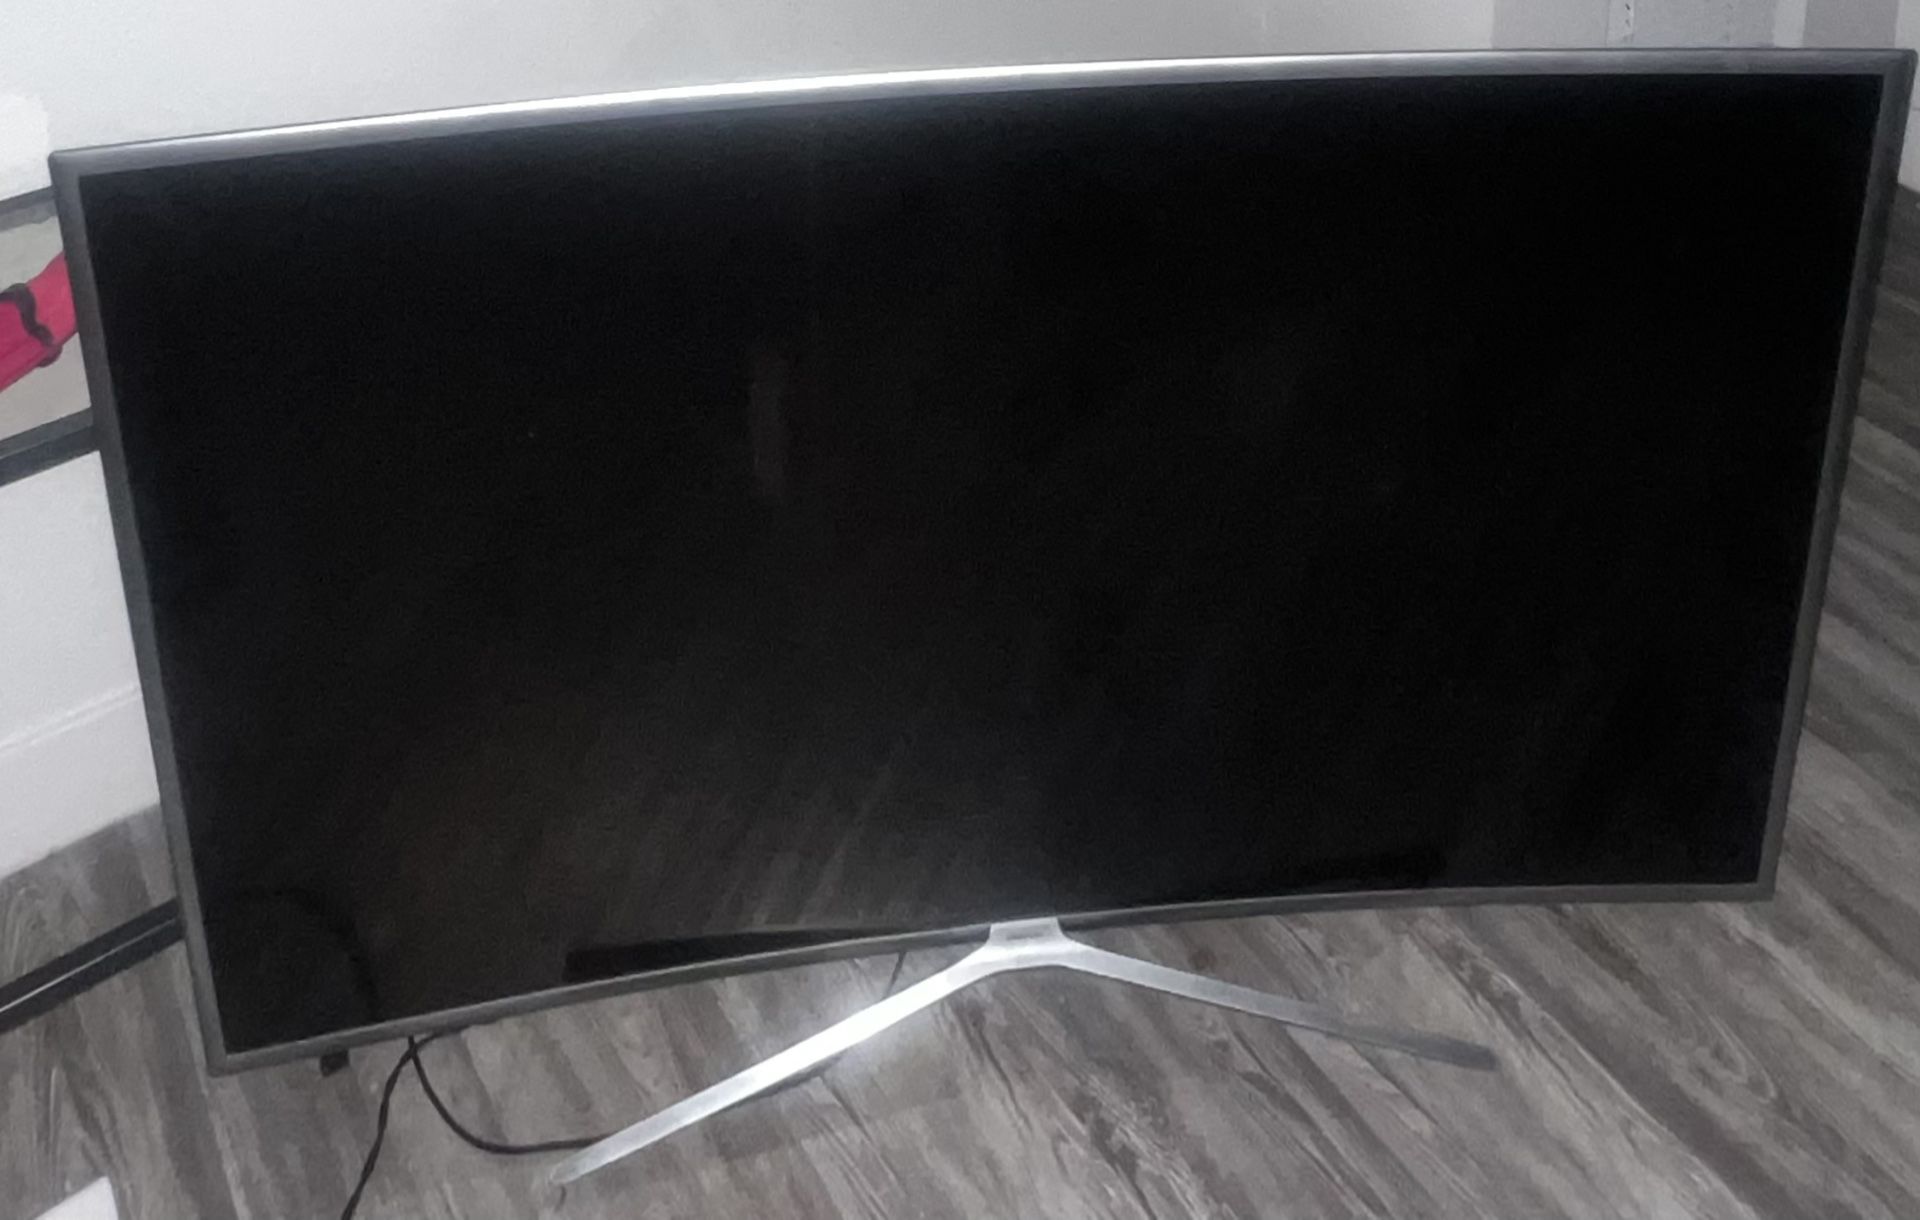 Samsung Curved 55-Inch Smart LED TV Working Condition No Remote 